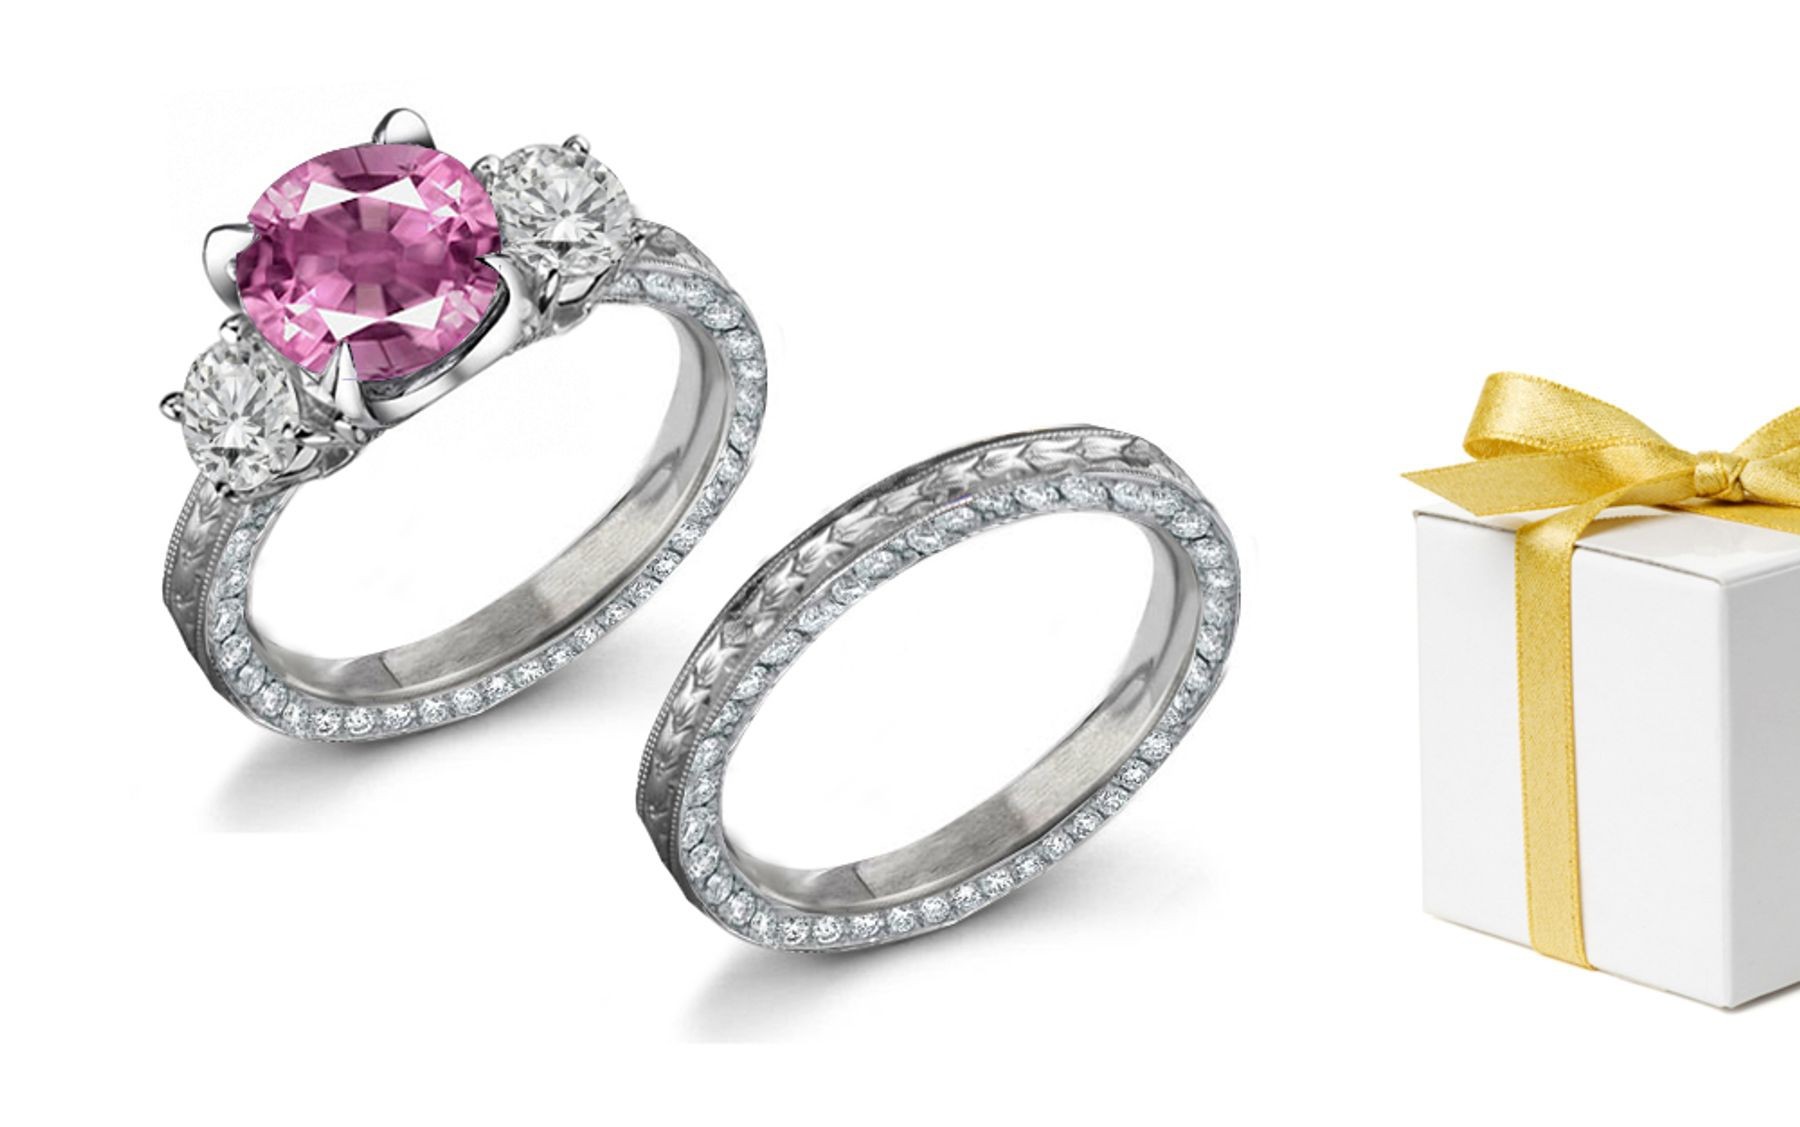 Vintage: Engraved Pink Sapphire Diamond Ring Availability: In stock